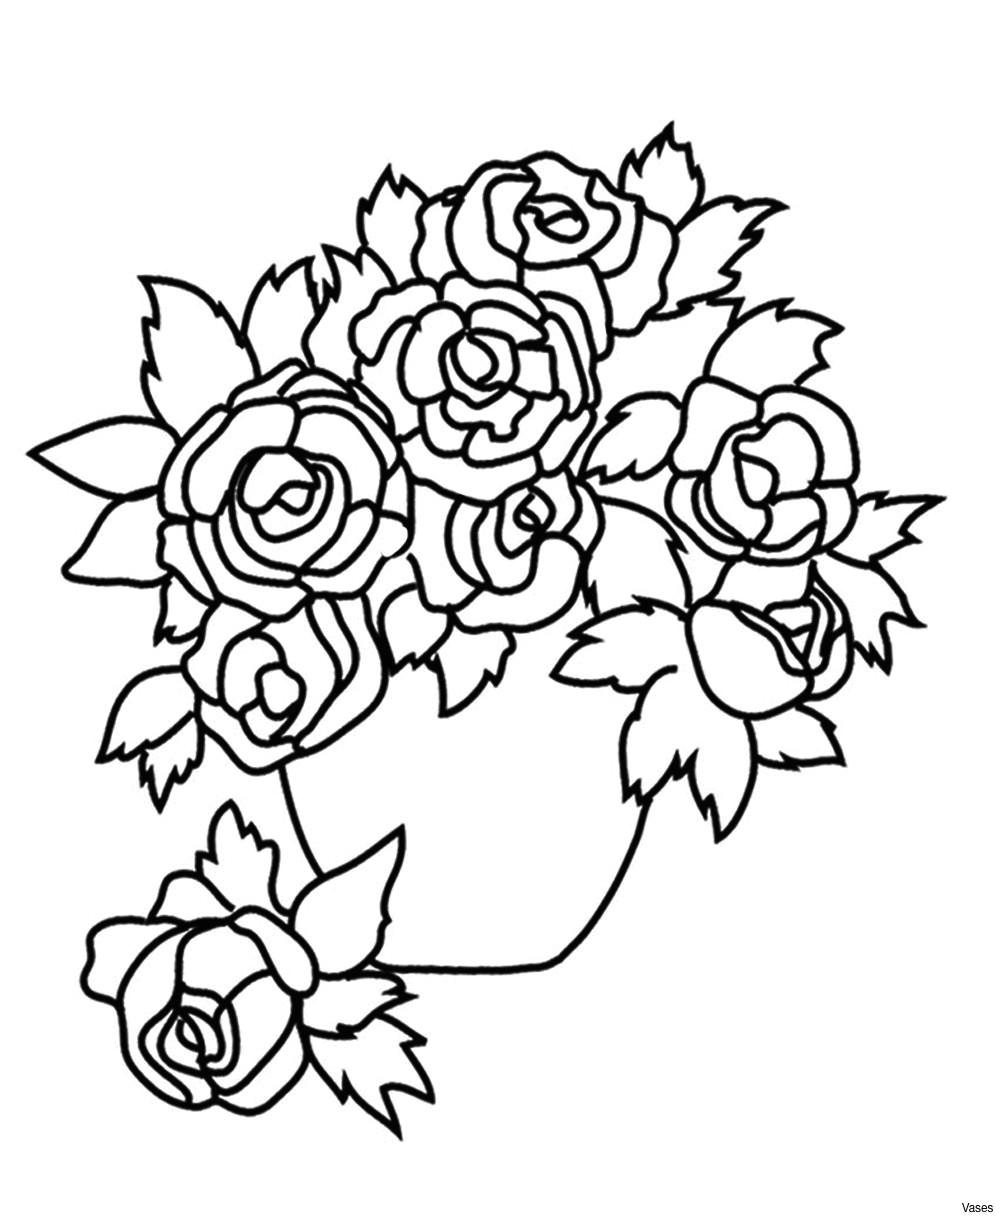 easy coloring flowers best of 28 stylish single flower vase of easy coloring flowers jpg